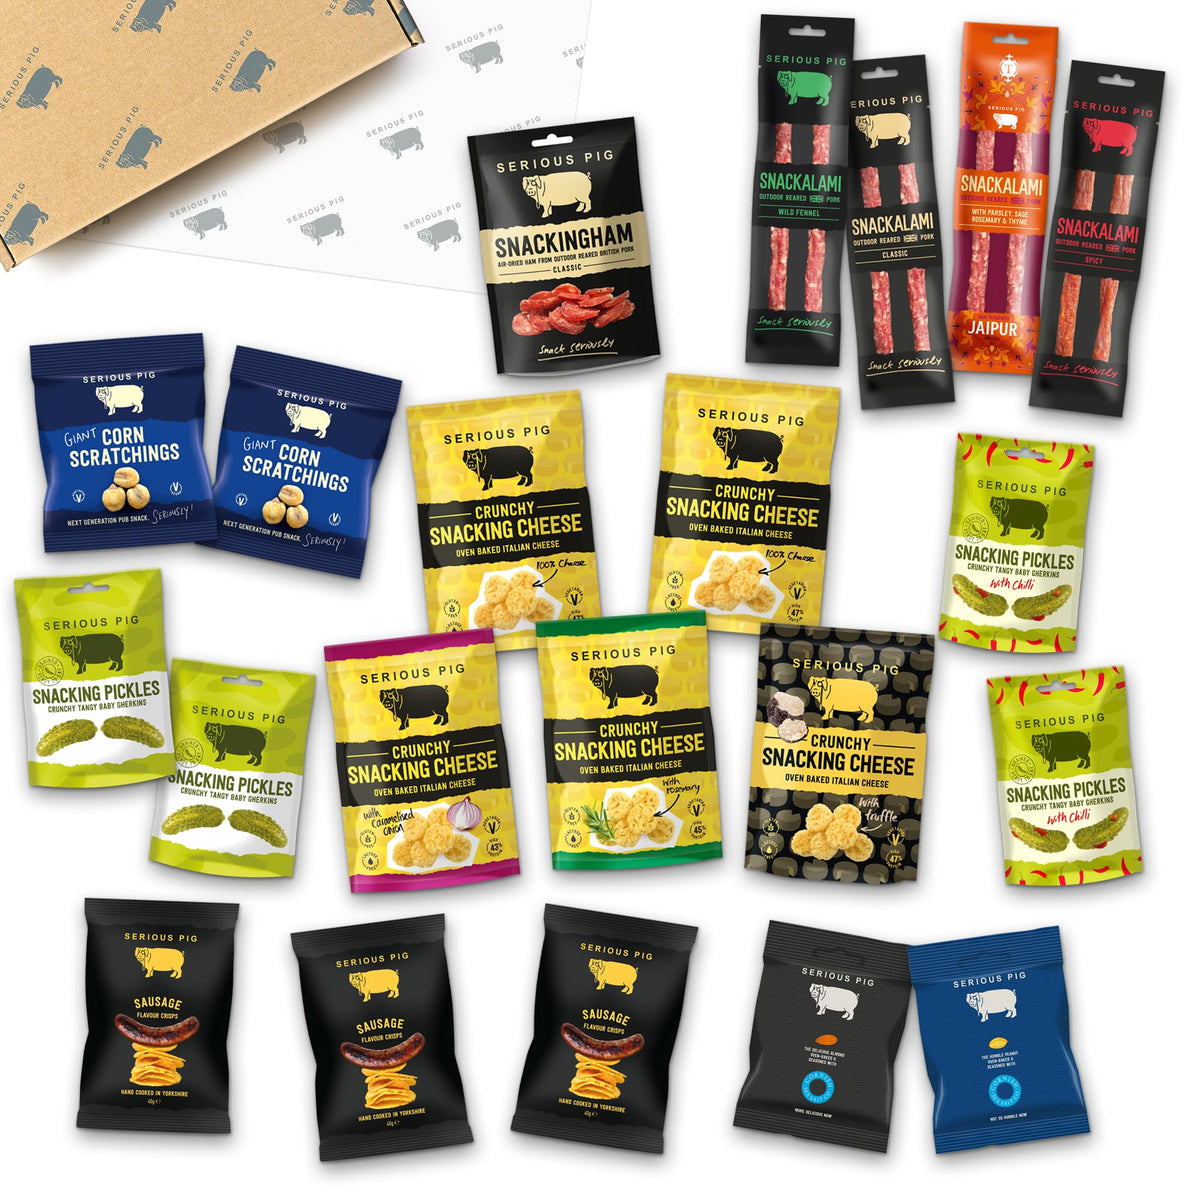 SERIOUS PIG | Gourmet Snack Hamper | with Crunchy Cheese, Salami Sticks, Pickles, Crisps, Salted Peanuts, Roast Almonds and Corn Scratchings. Delicious Savoury Pub Snacks (21 Packets)